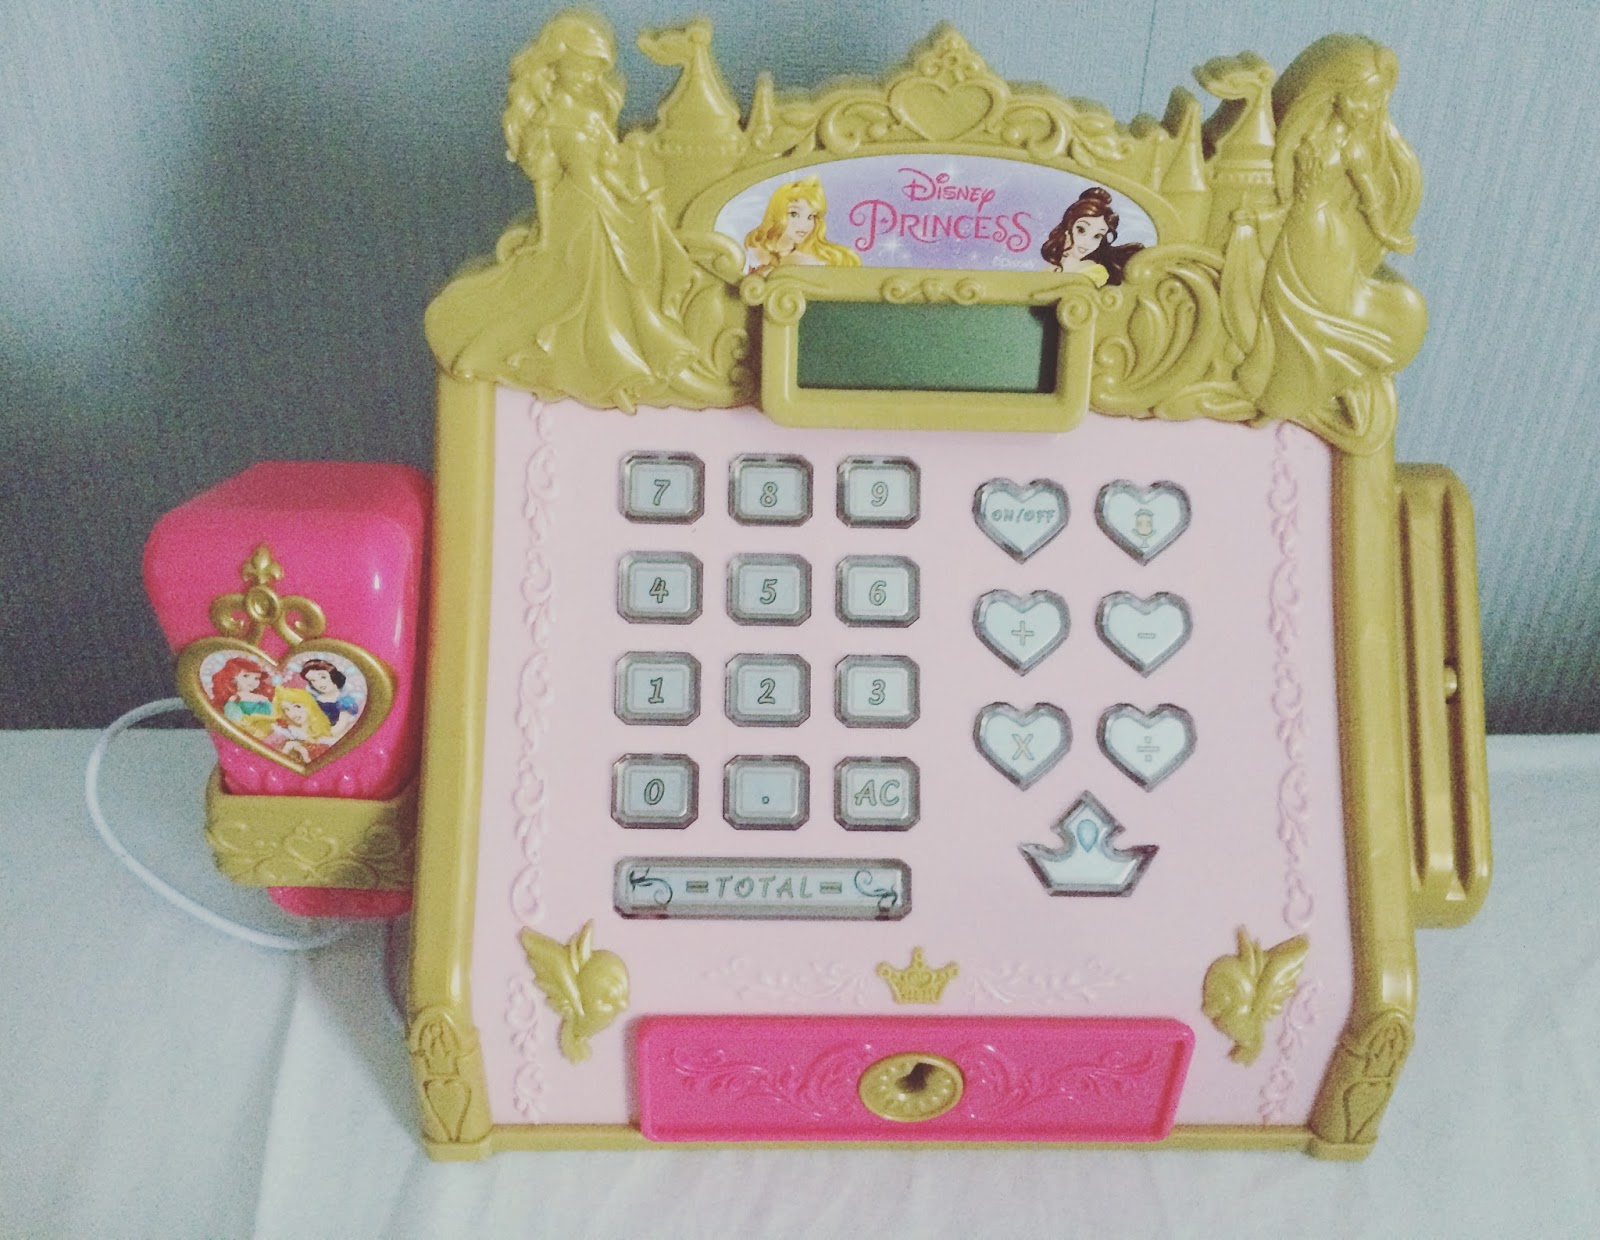 Disney Princess Cash Register For Ages 3 Years & Over New 